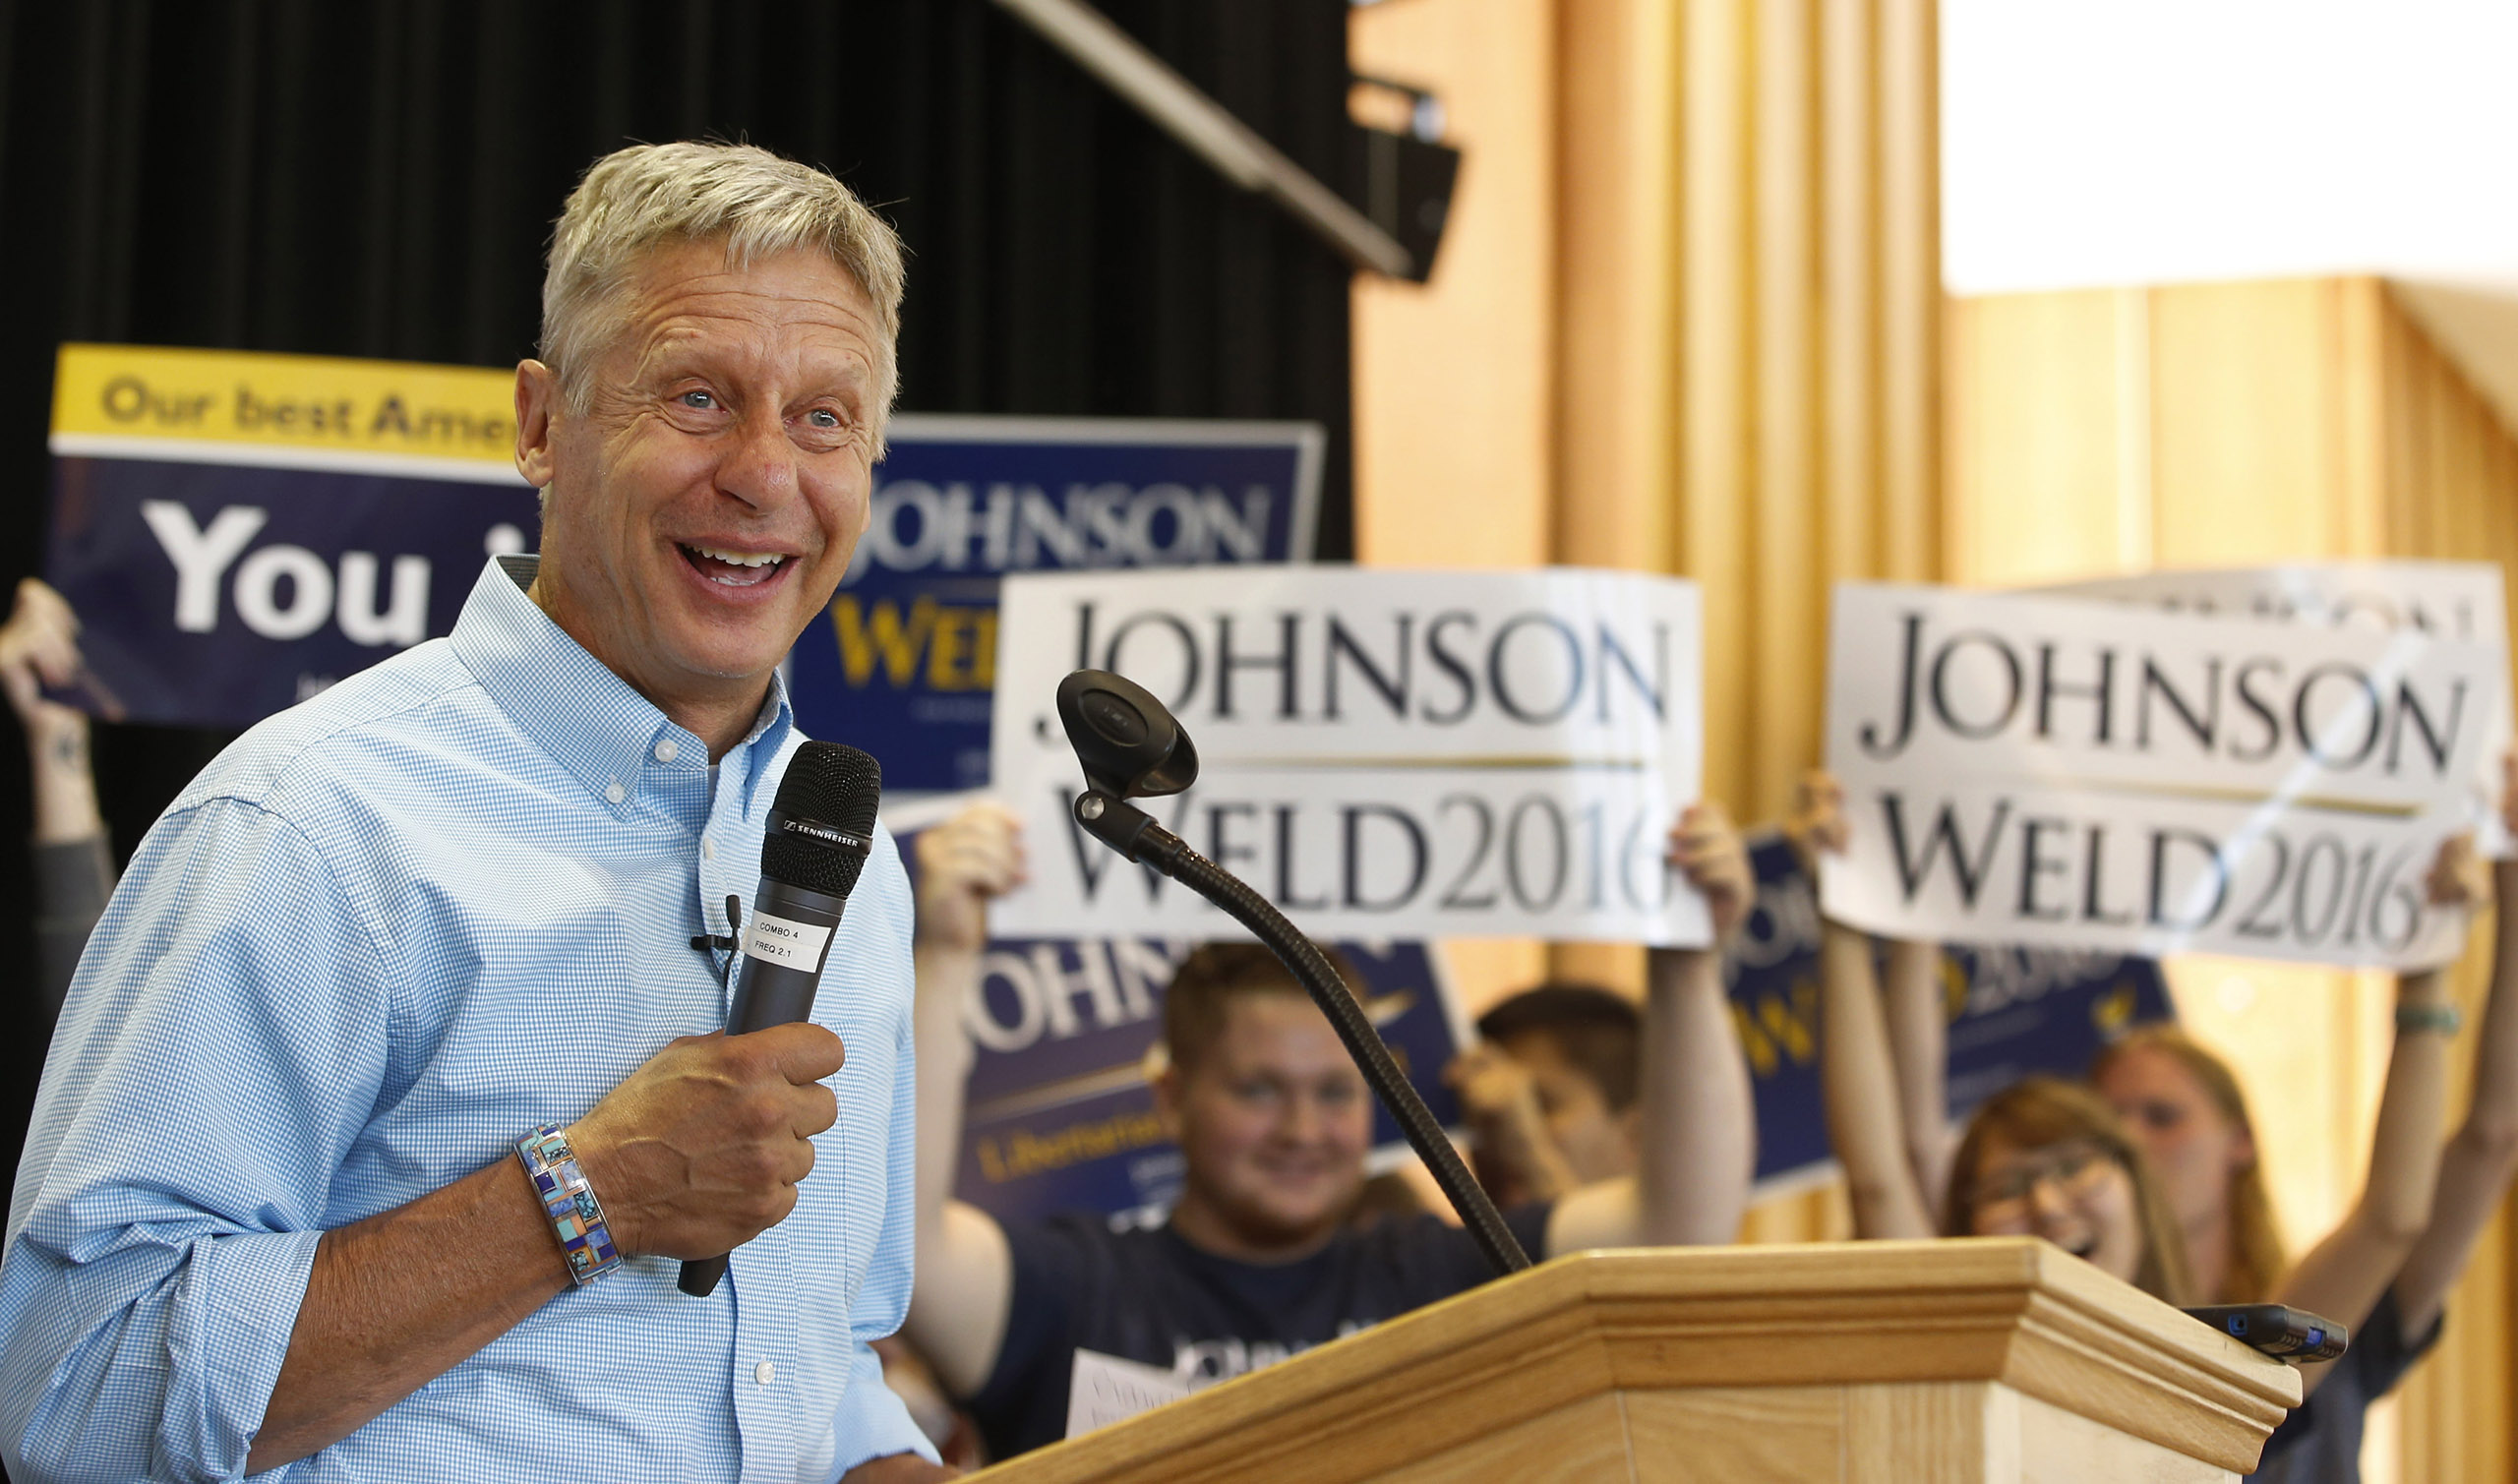 Libertarian presidential candidate Gary Johnson talks to a crowd of supporters at a rally in Salt Lake City, Utah, on Aug. 6, 2016. (George Frey—Getty Images)